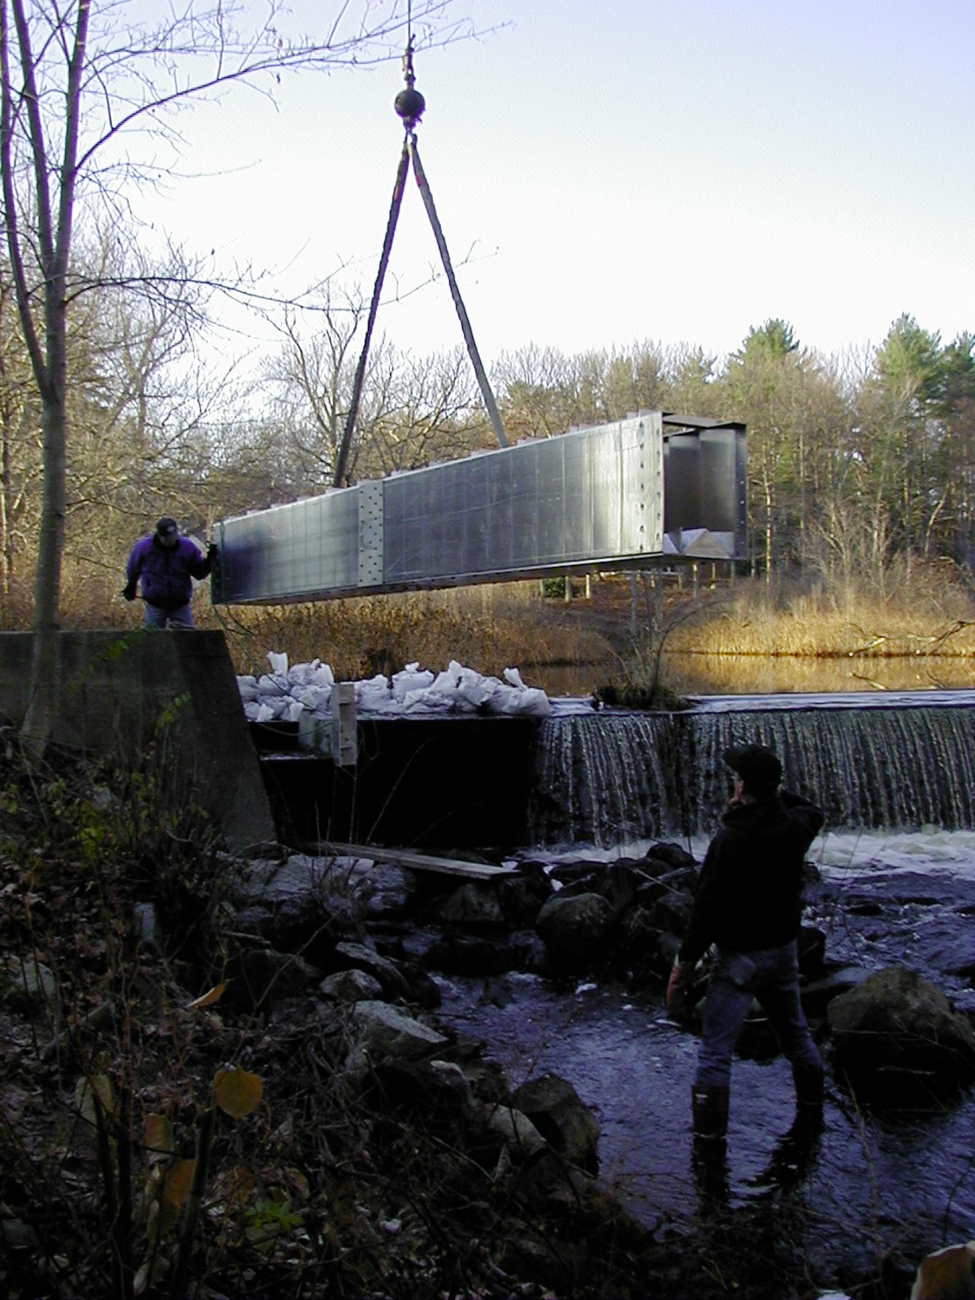 The crane lowers the first section into place, it is just about to be droppedinto the notched dam